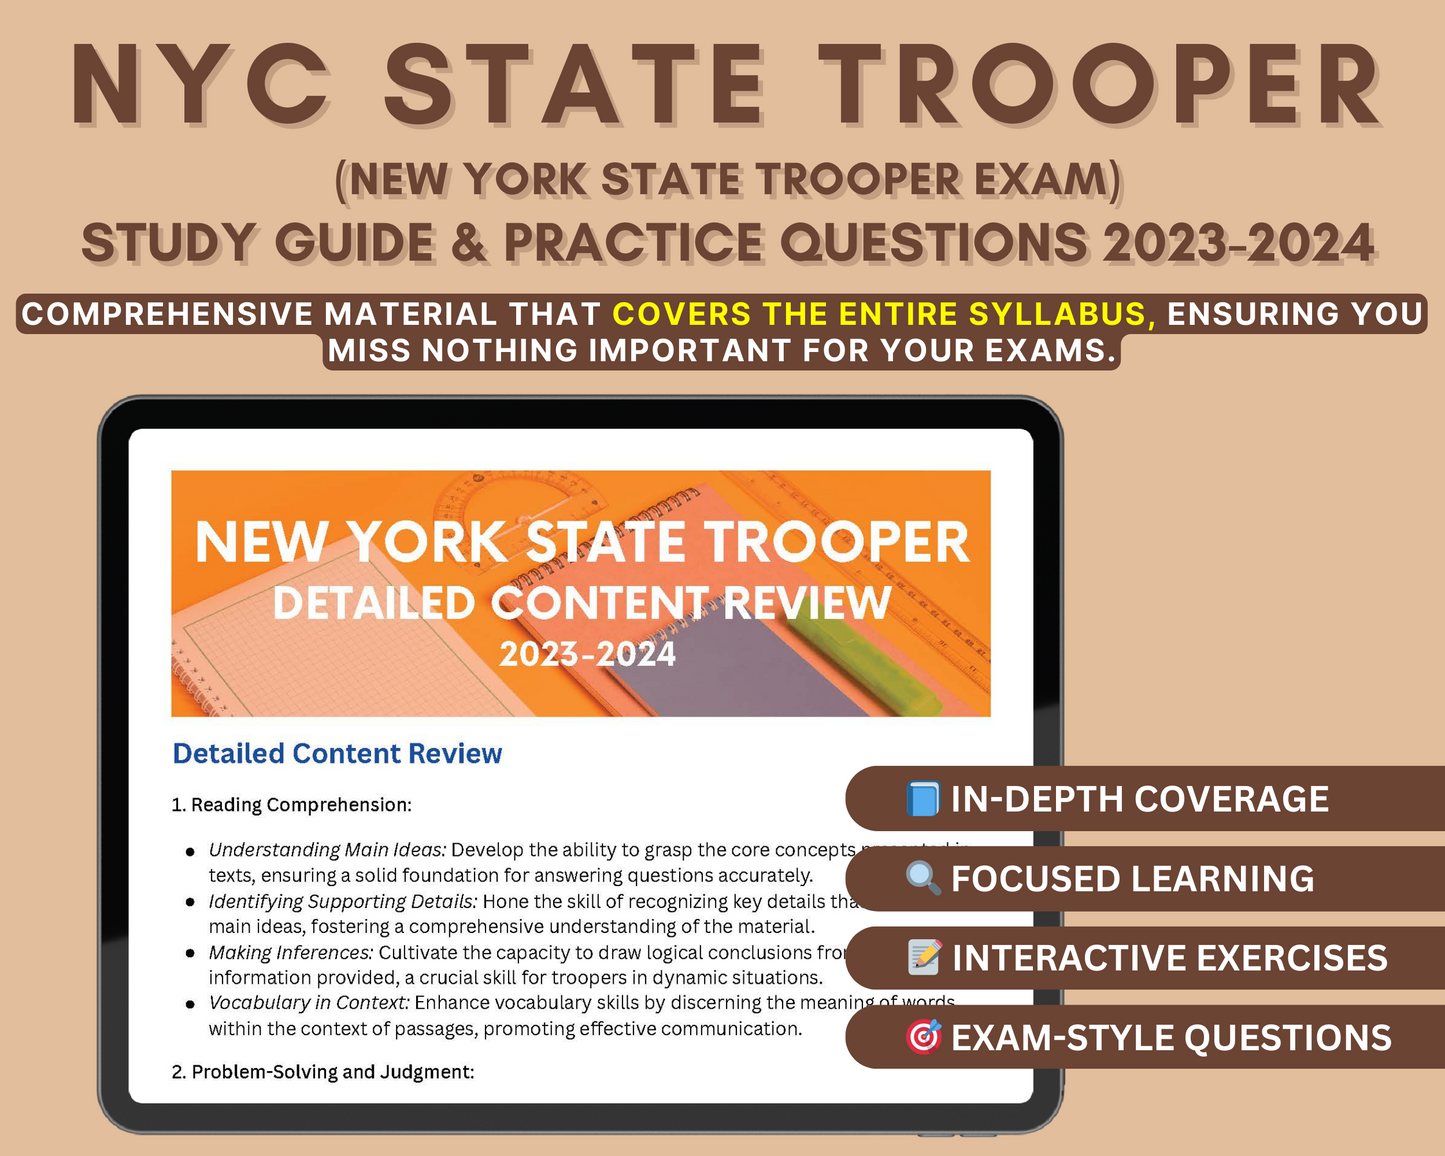 New York State Trooper Exam Prep 2023-2024: In-Depth Content Review, Practice Tests for Aspiring State Troopers